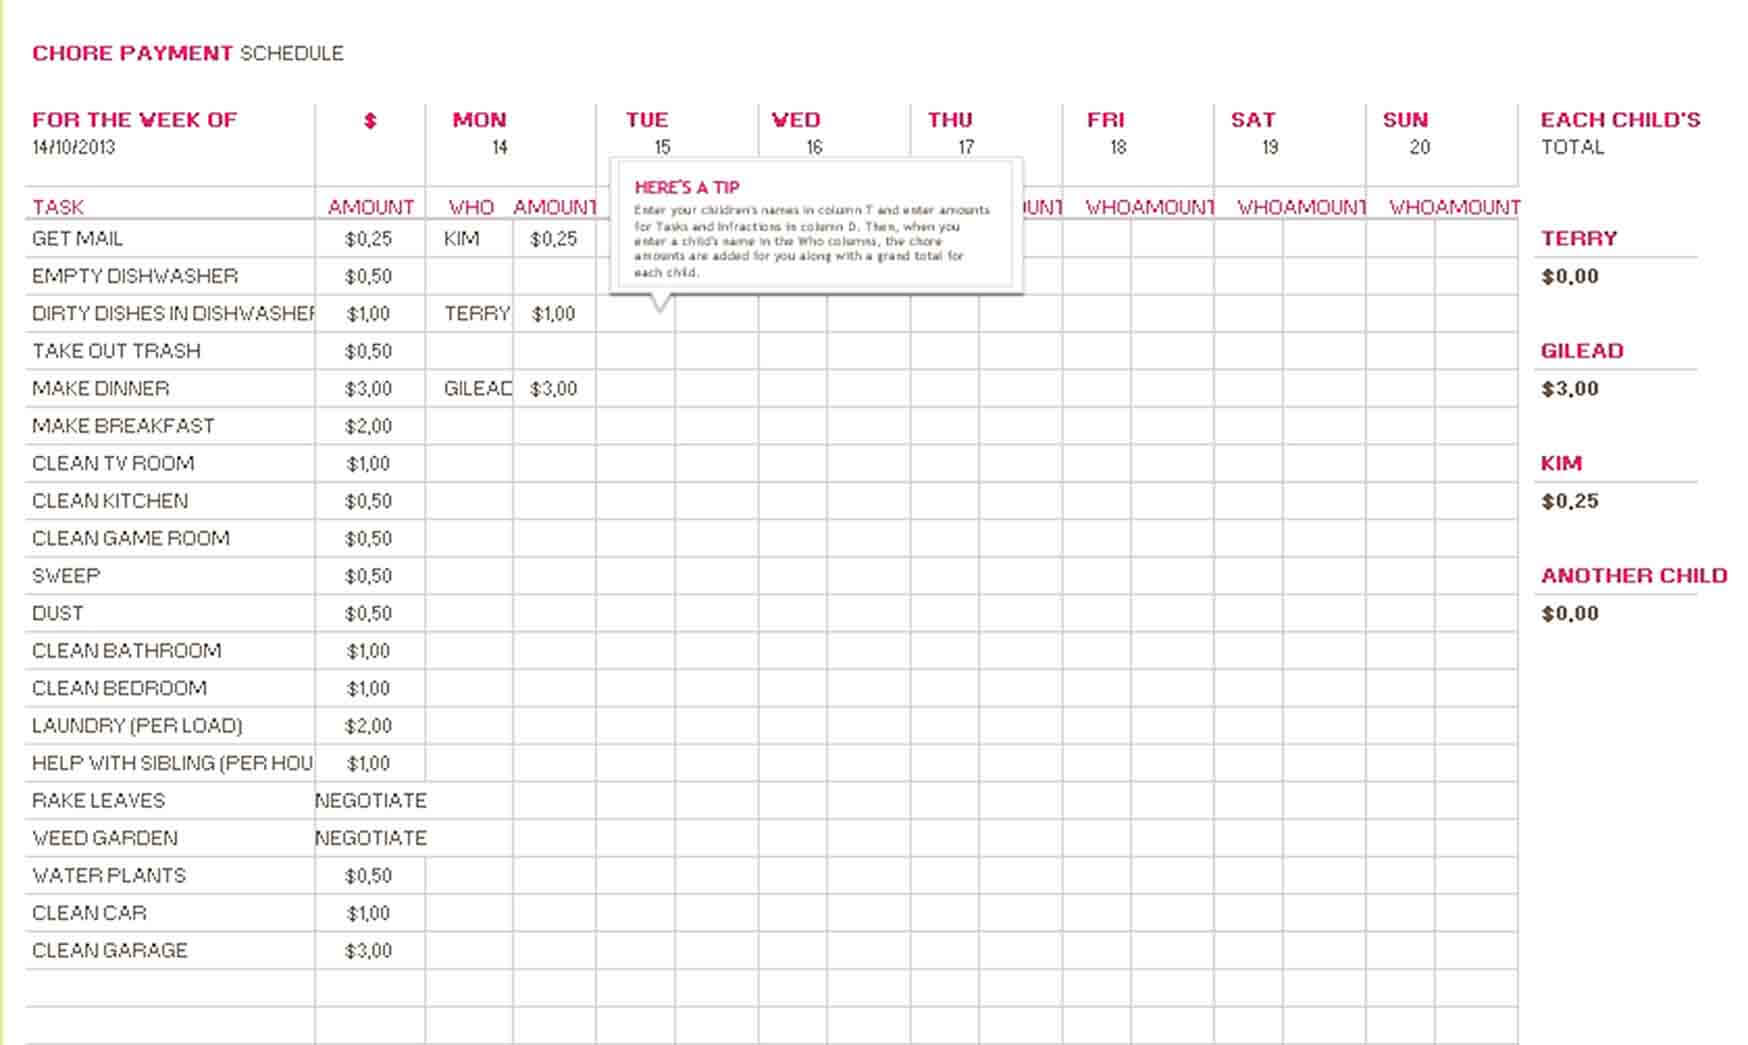 Free Chore Payment Schedule Template for Excel